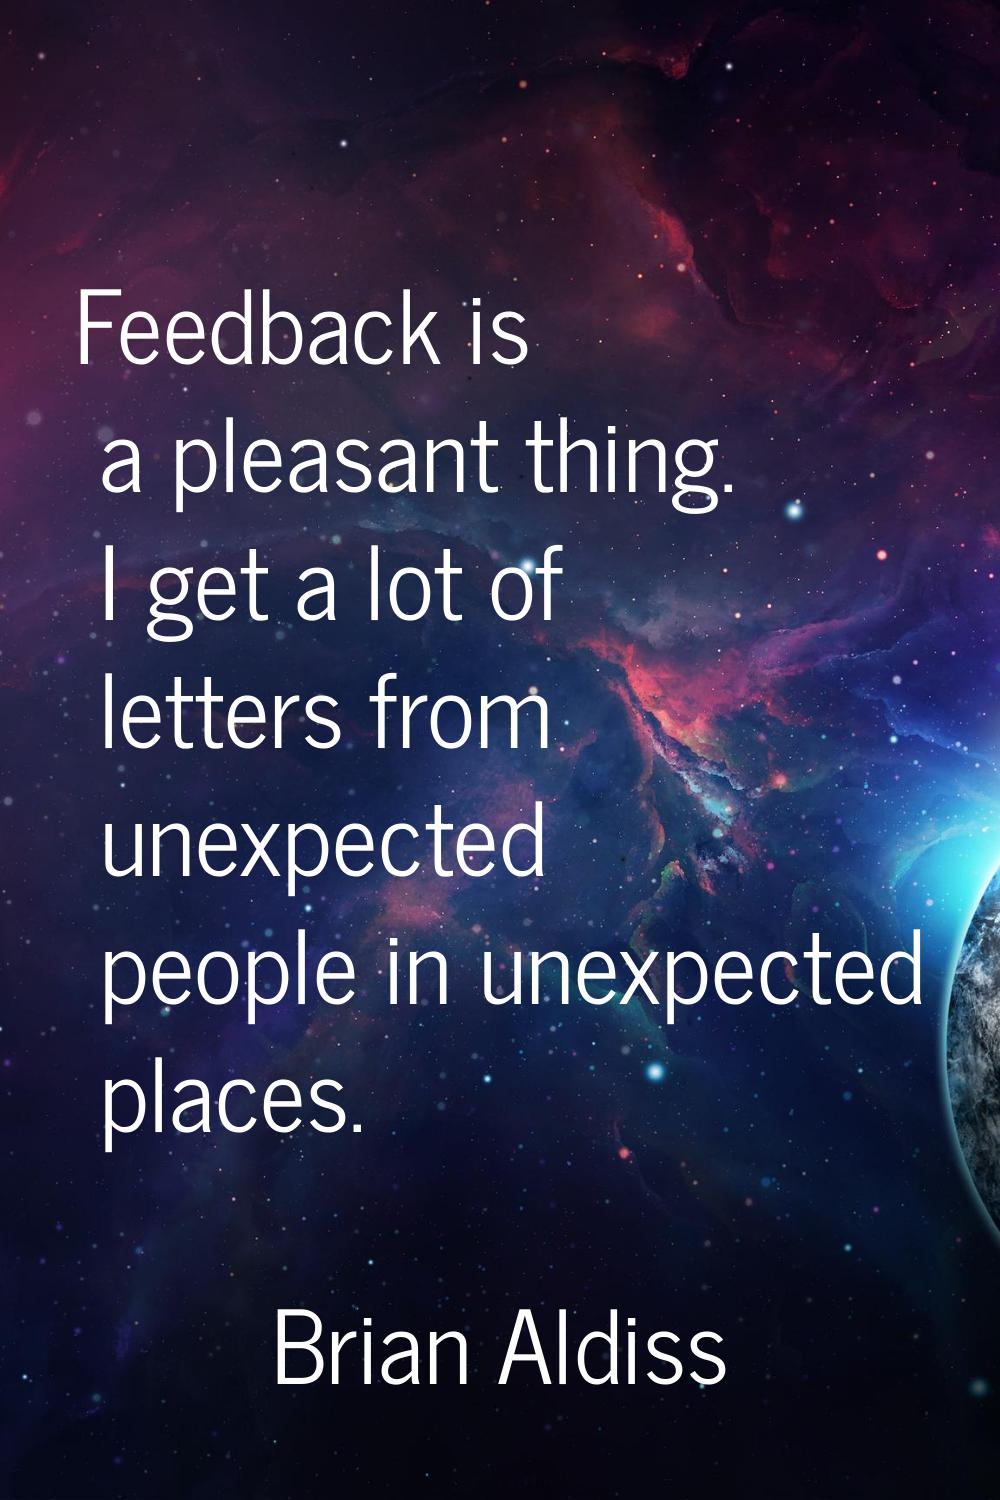 Feedback is a pleasant thing. I get a lot of letters from unexpected people in unexpected places.